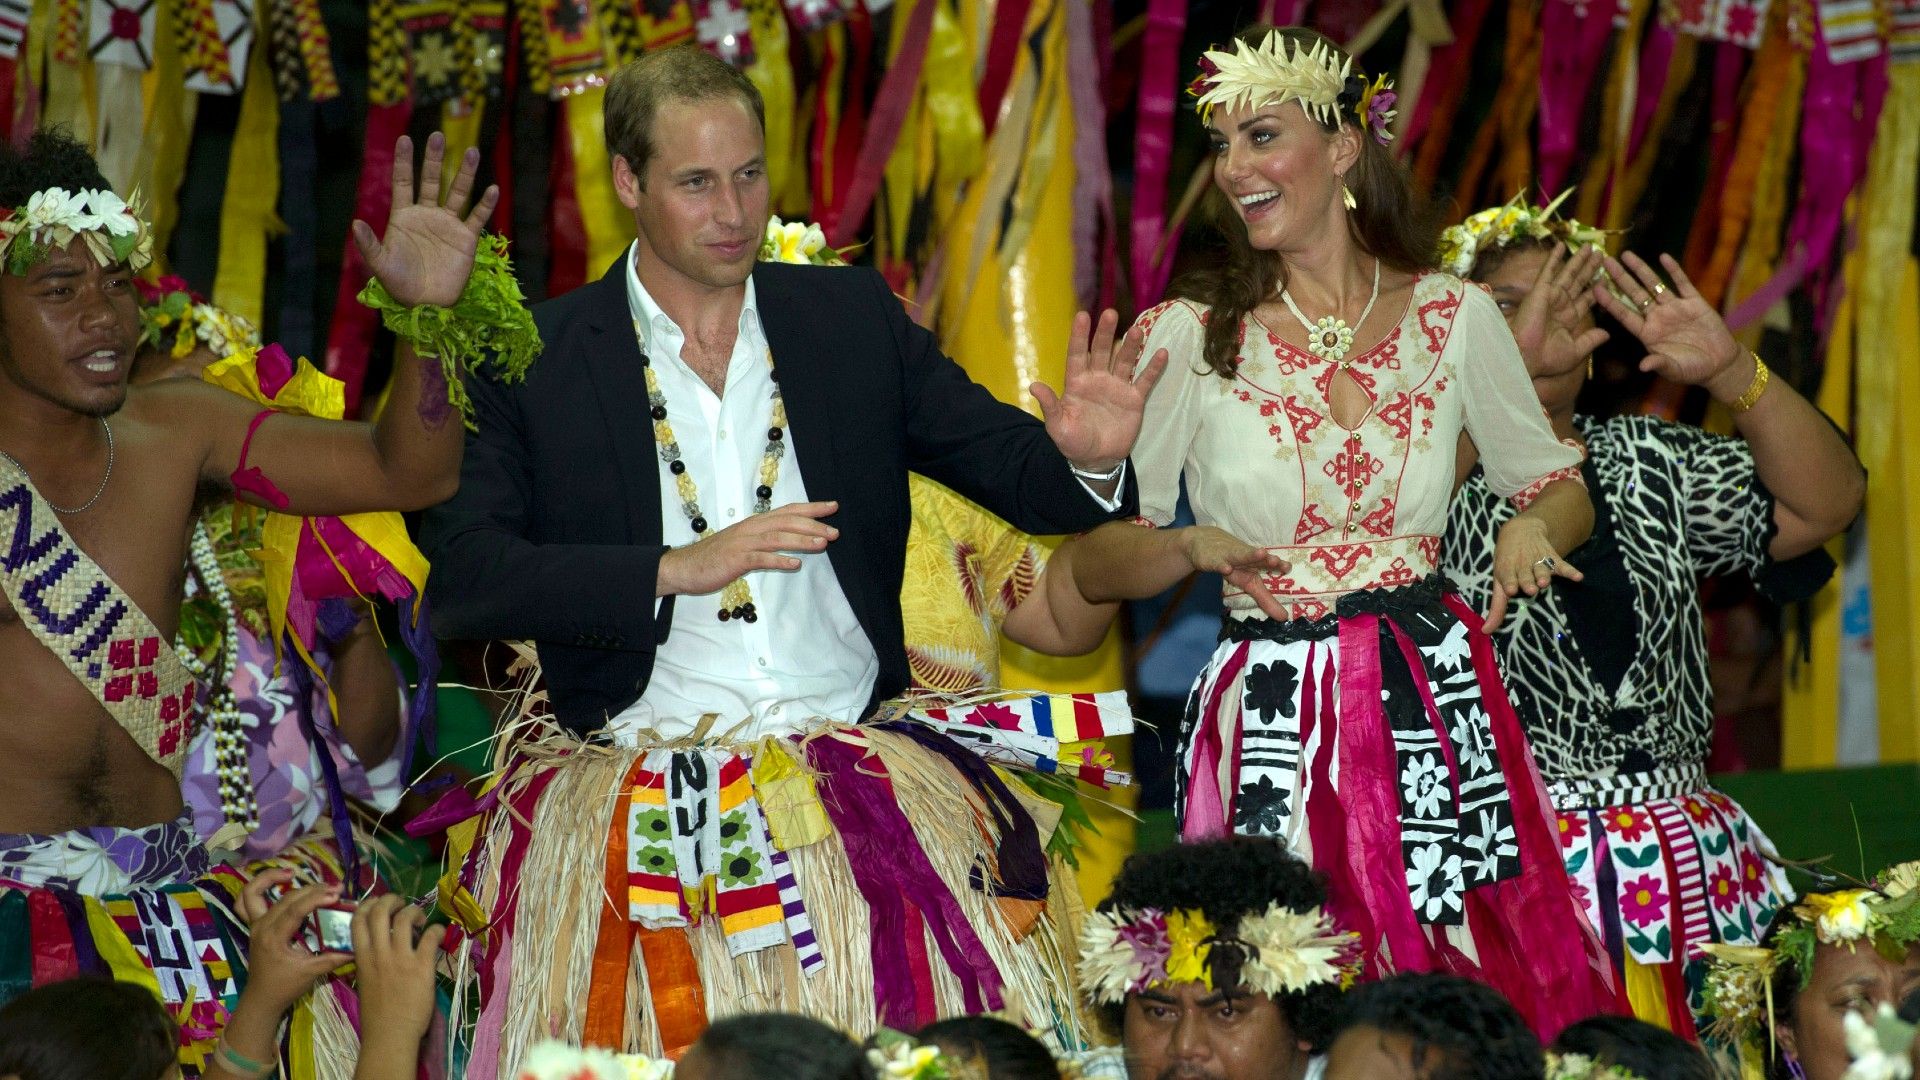 <p>                     More used to sombre and serious occasions, one of the most memorable tour moments came in 2012, when Prince William and Kate Middleton brought fans plenty of joy with their carefree dance moves.                   </p>                                      <p>                     During their trip to Tuvalu, an island in the South Pacific, as part of the Queen's Jubilee Tour in 2012, William showed no hesitation in throwing some shapes - much to the delight of his wife.                   </p>                                      <p>                     Kate, while looking more shy, got in on the fun, too.                   </p>